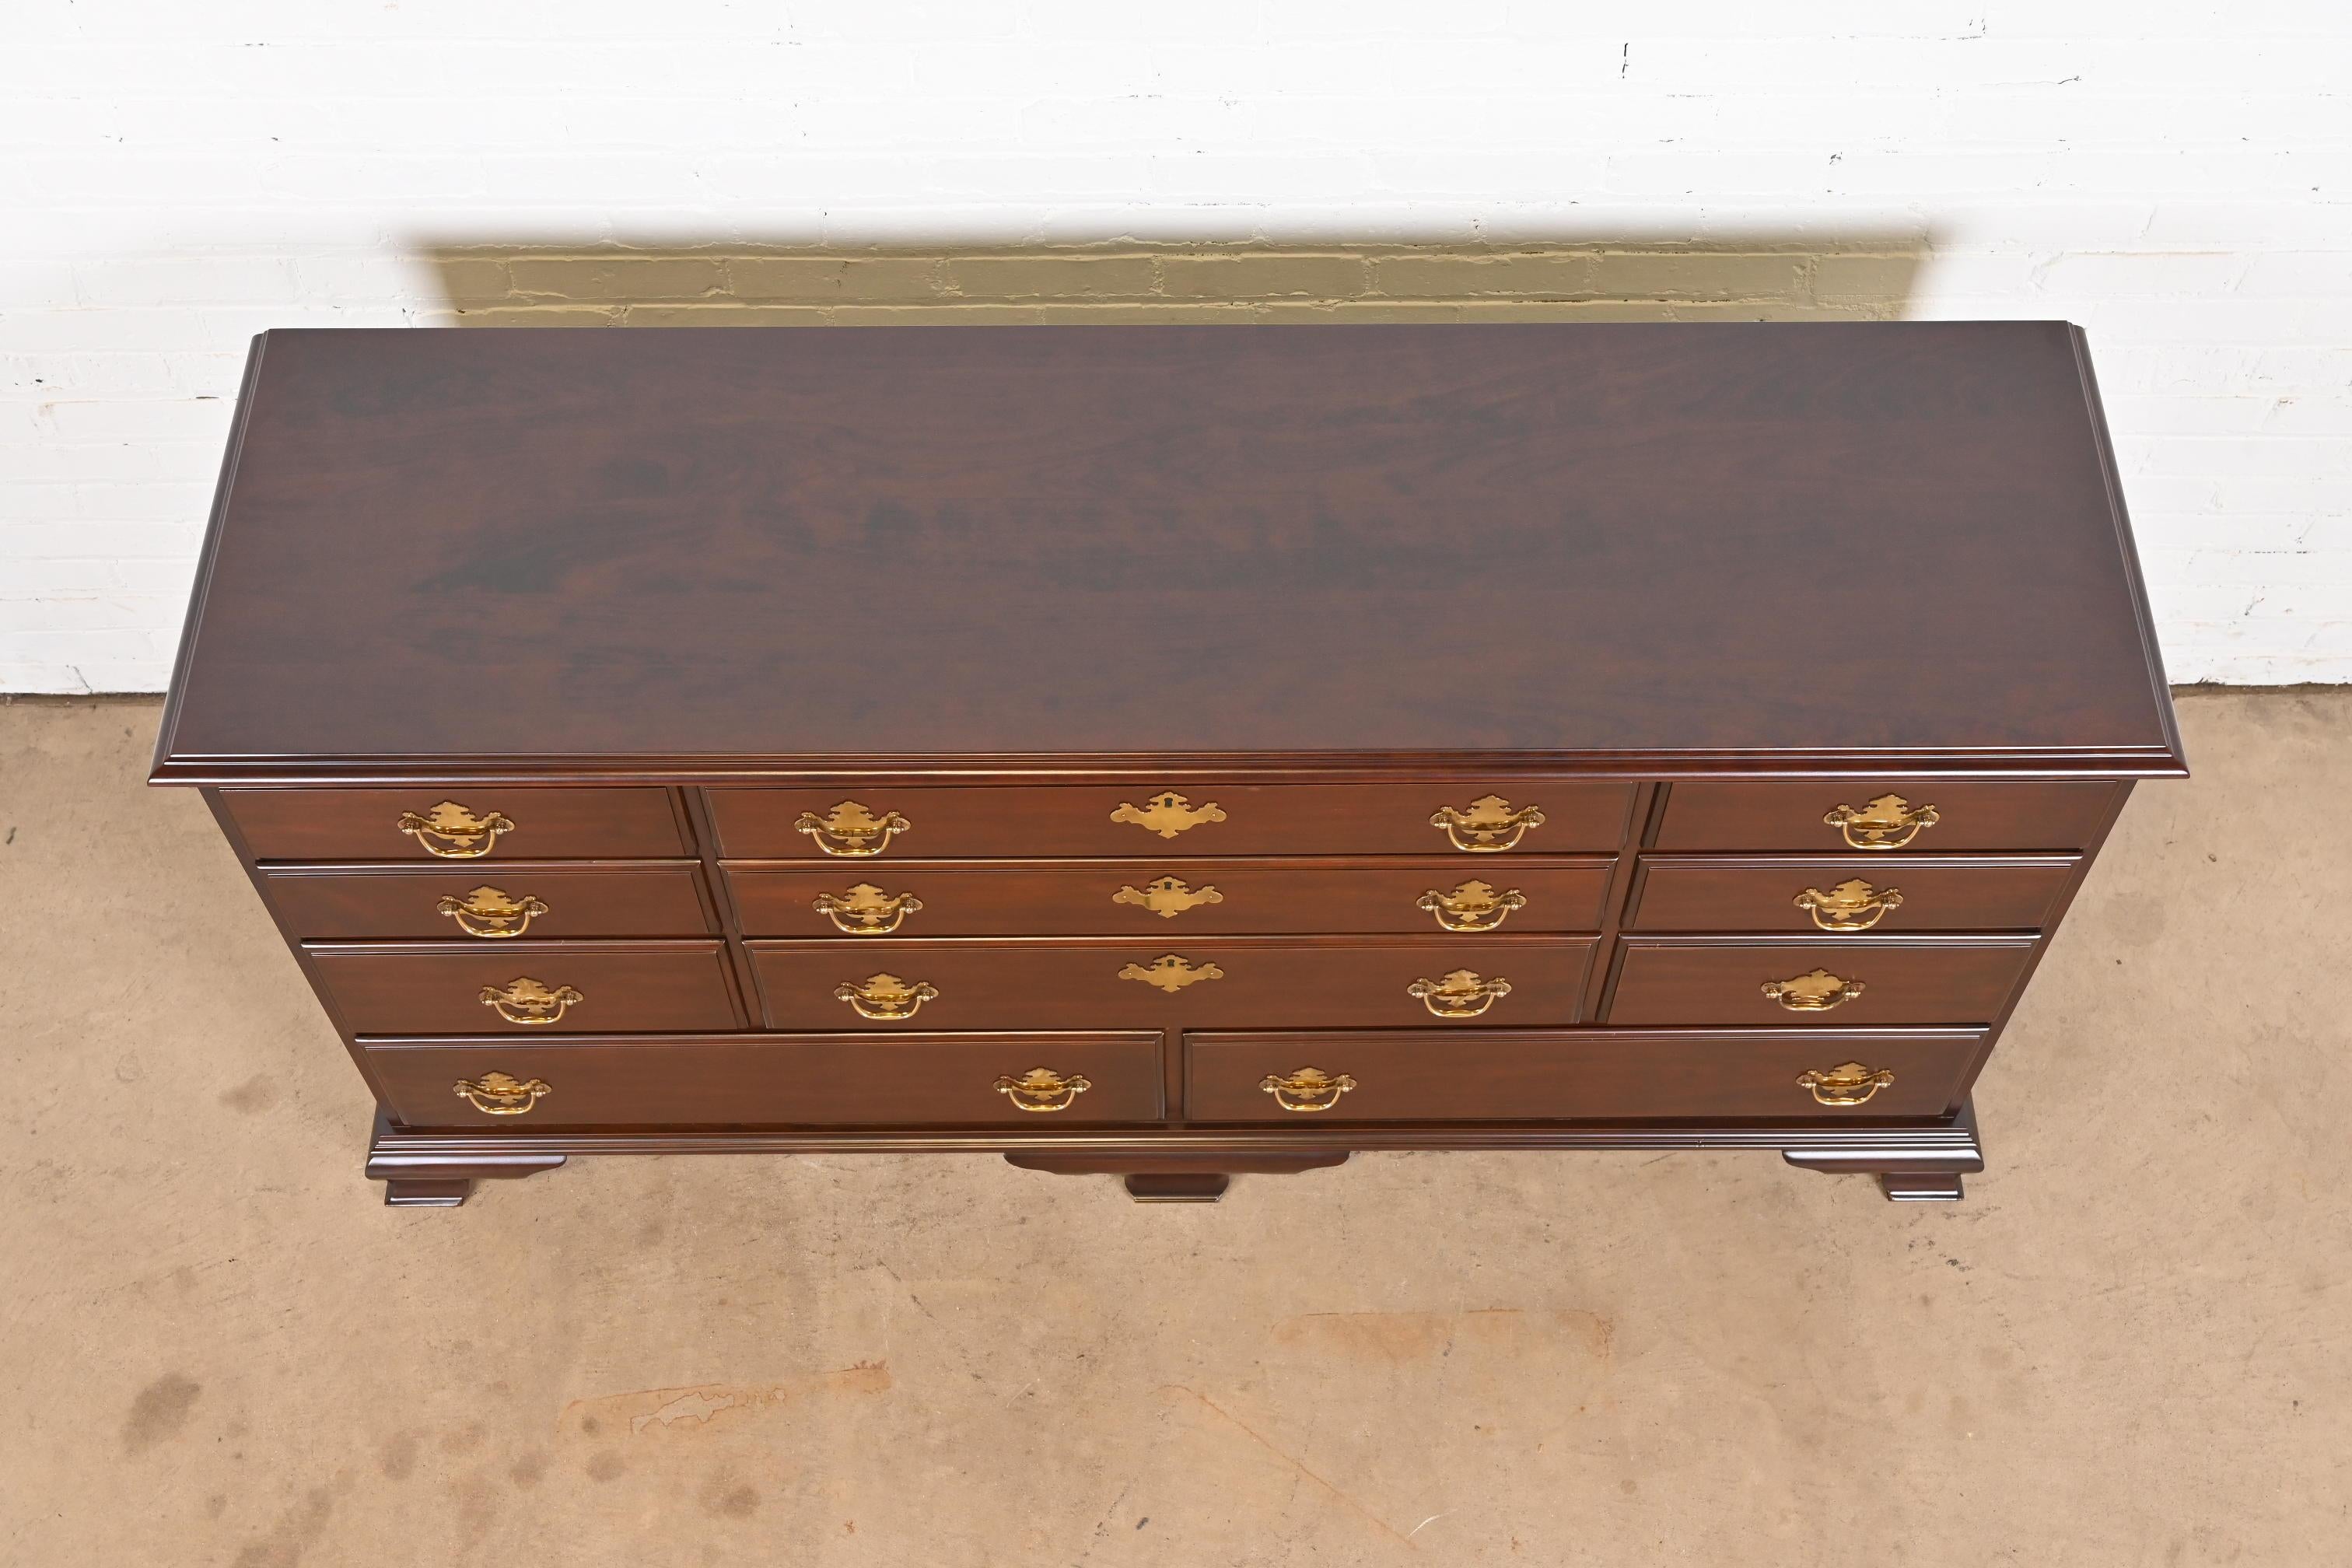 Harden Furniture Georgian Carved Solid Cherry Wood Long Dresser, Newly Restored For Sale 5